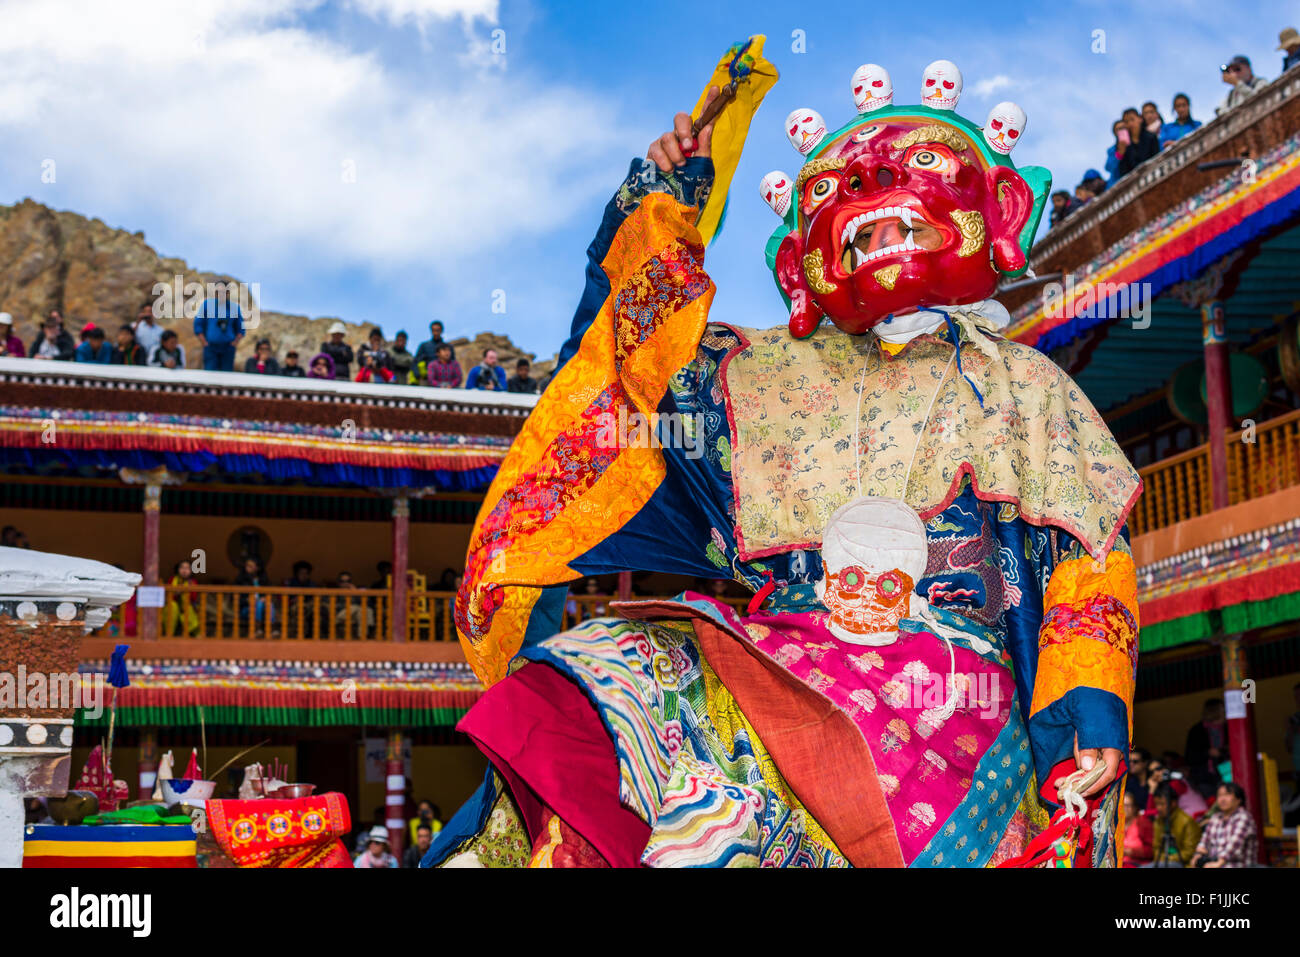 Monks with big wooden masks and colorful costumes are performing ritual dances at Hemis Festival in the courtyard of the Stock Photo